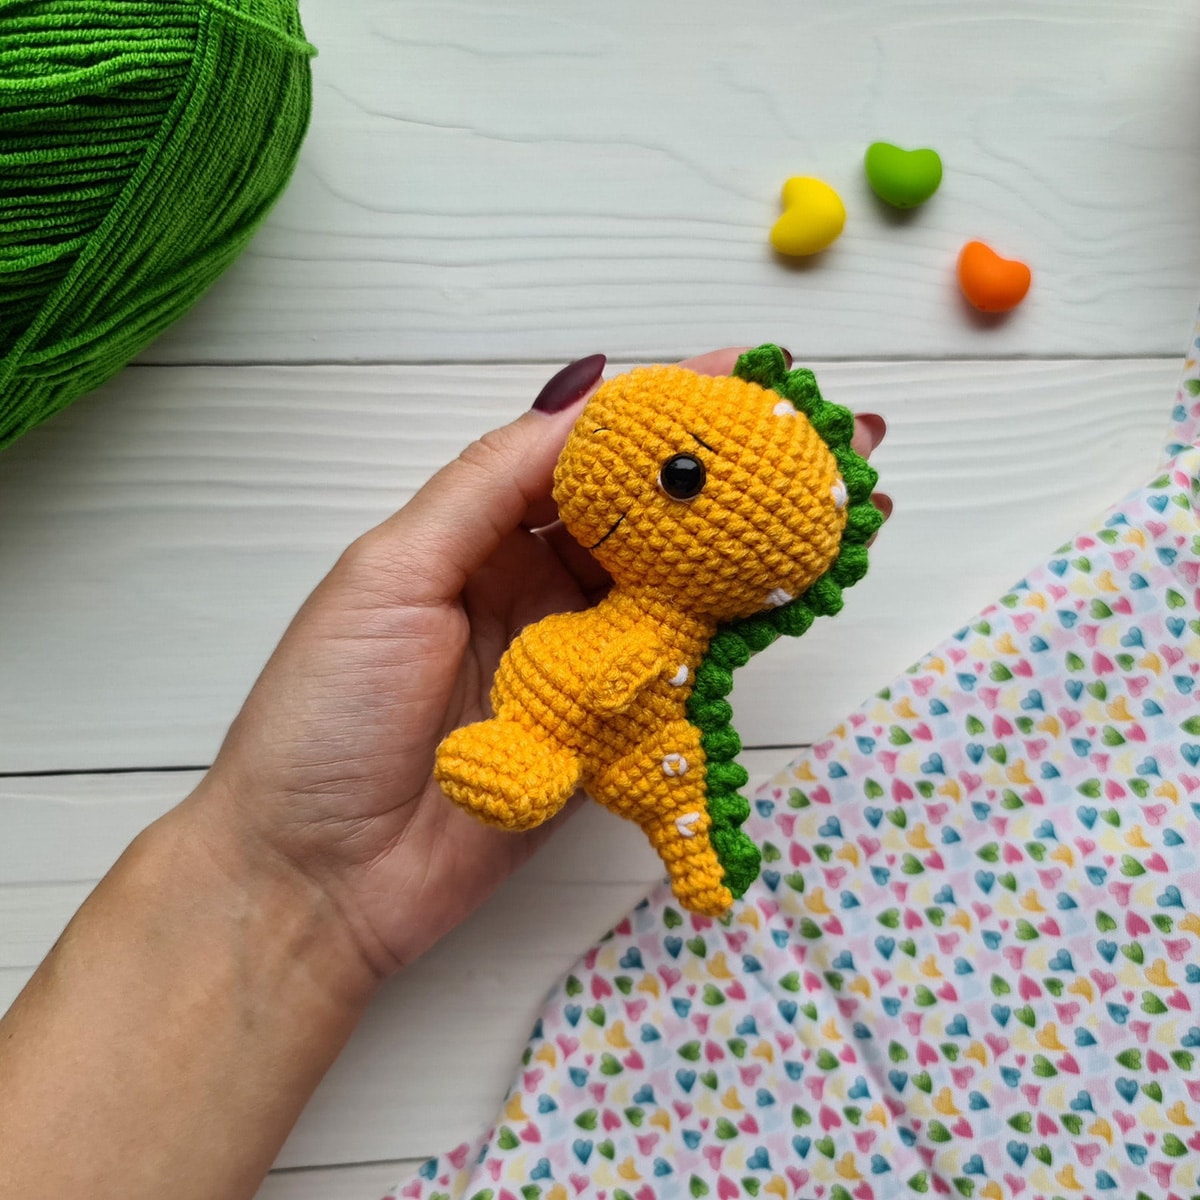 A manicured hand holding a small yellow crochet baby dinosaur with green spikes down its back on a white wooden background.